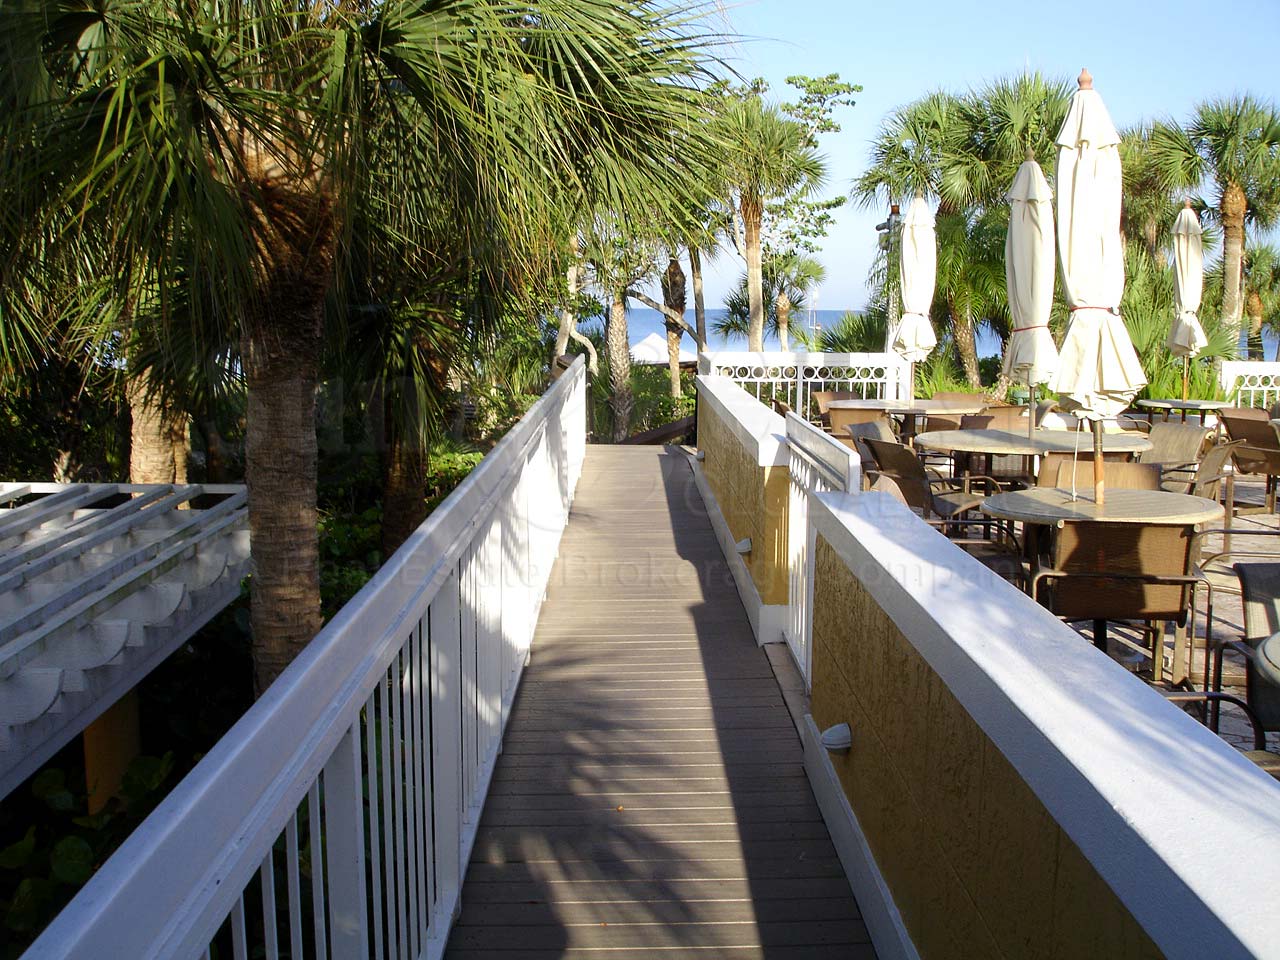 BAY COLONY Club Walkway to the Beach from the Clubhouse